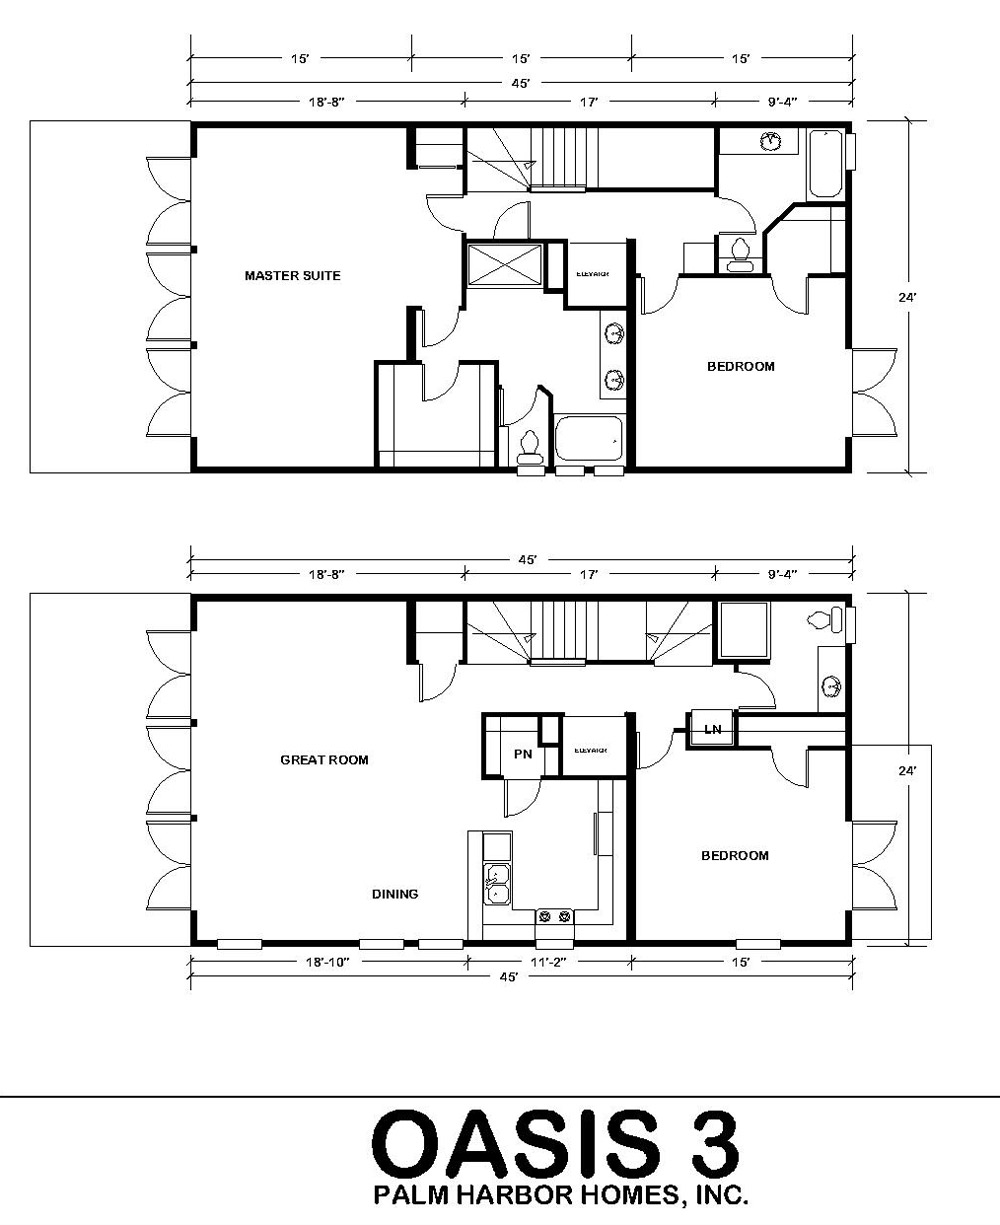 Simple 2 Story House Floor Plans 2 Story Small House, two